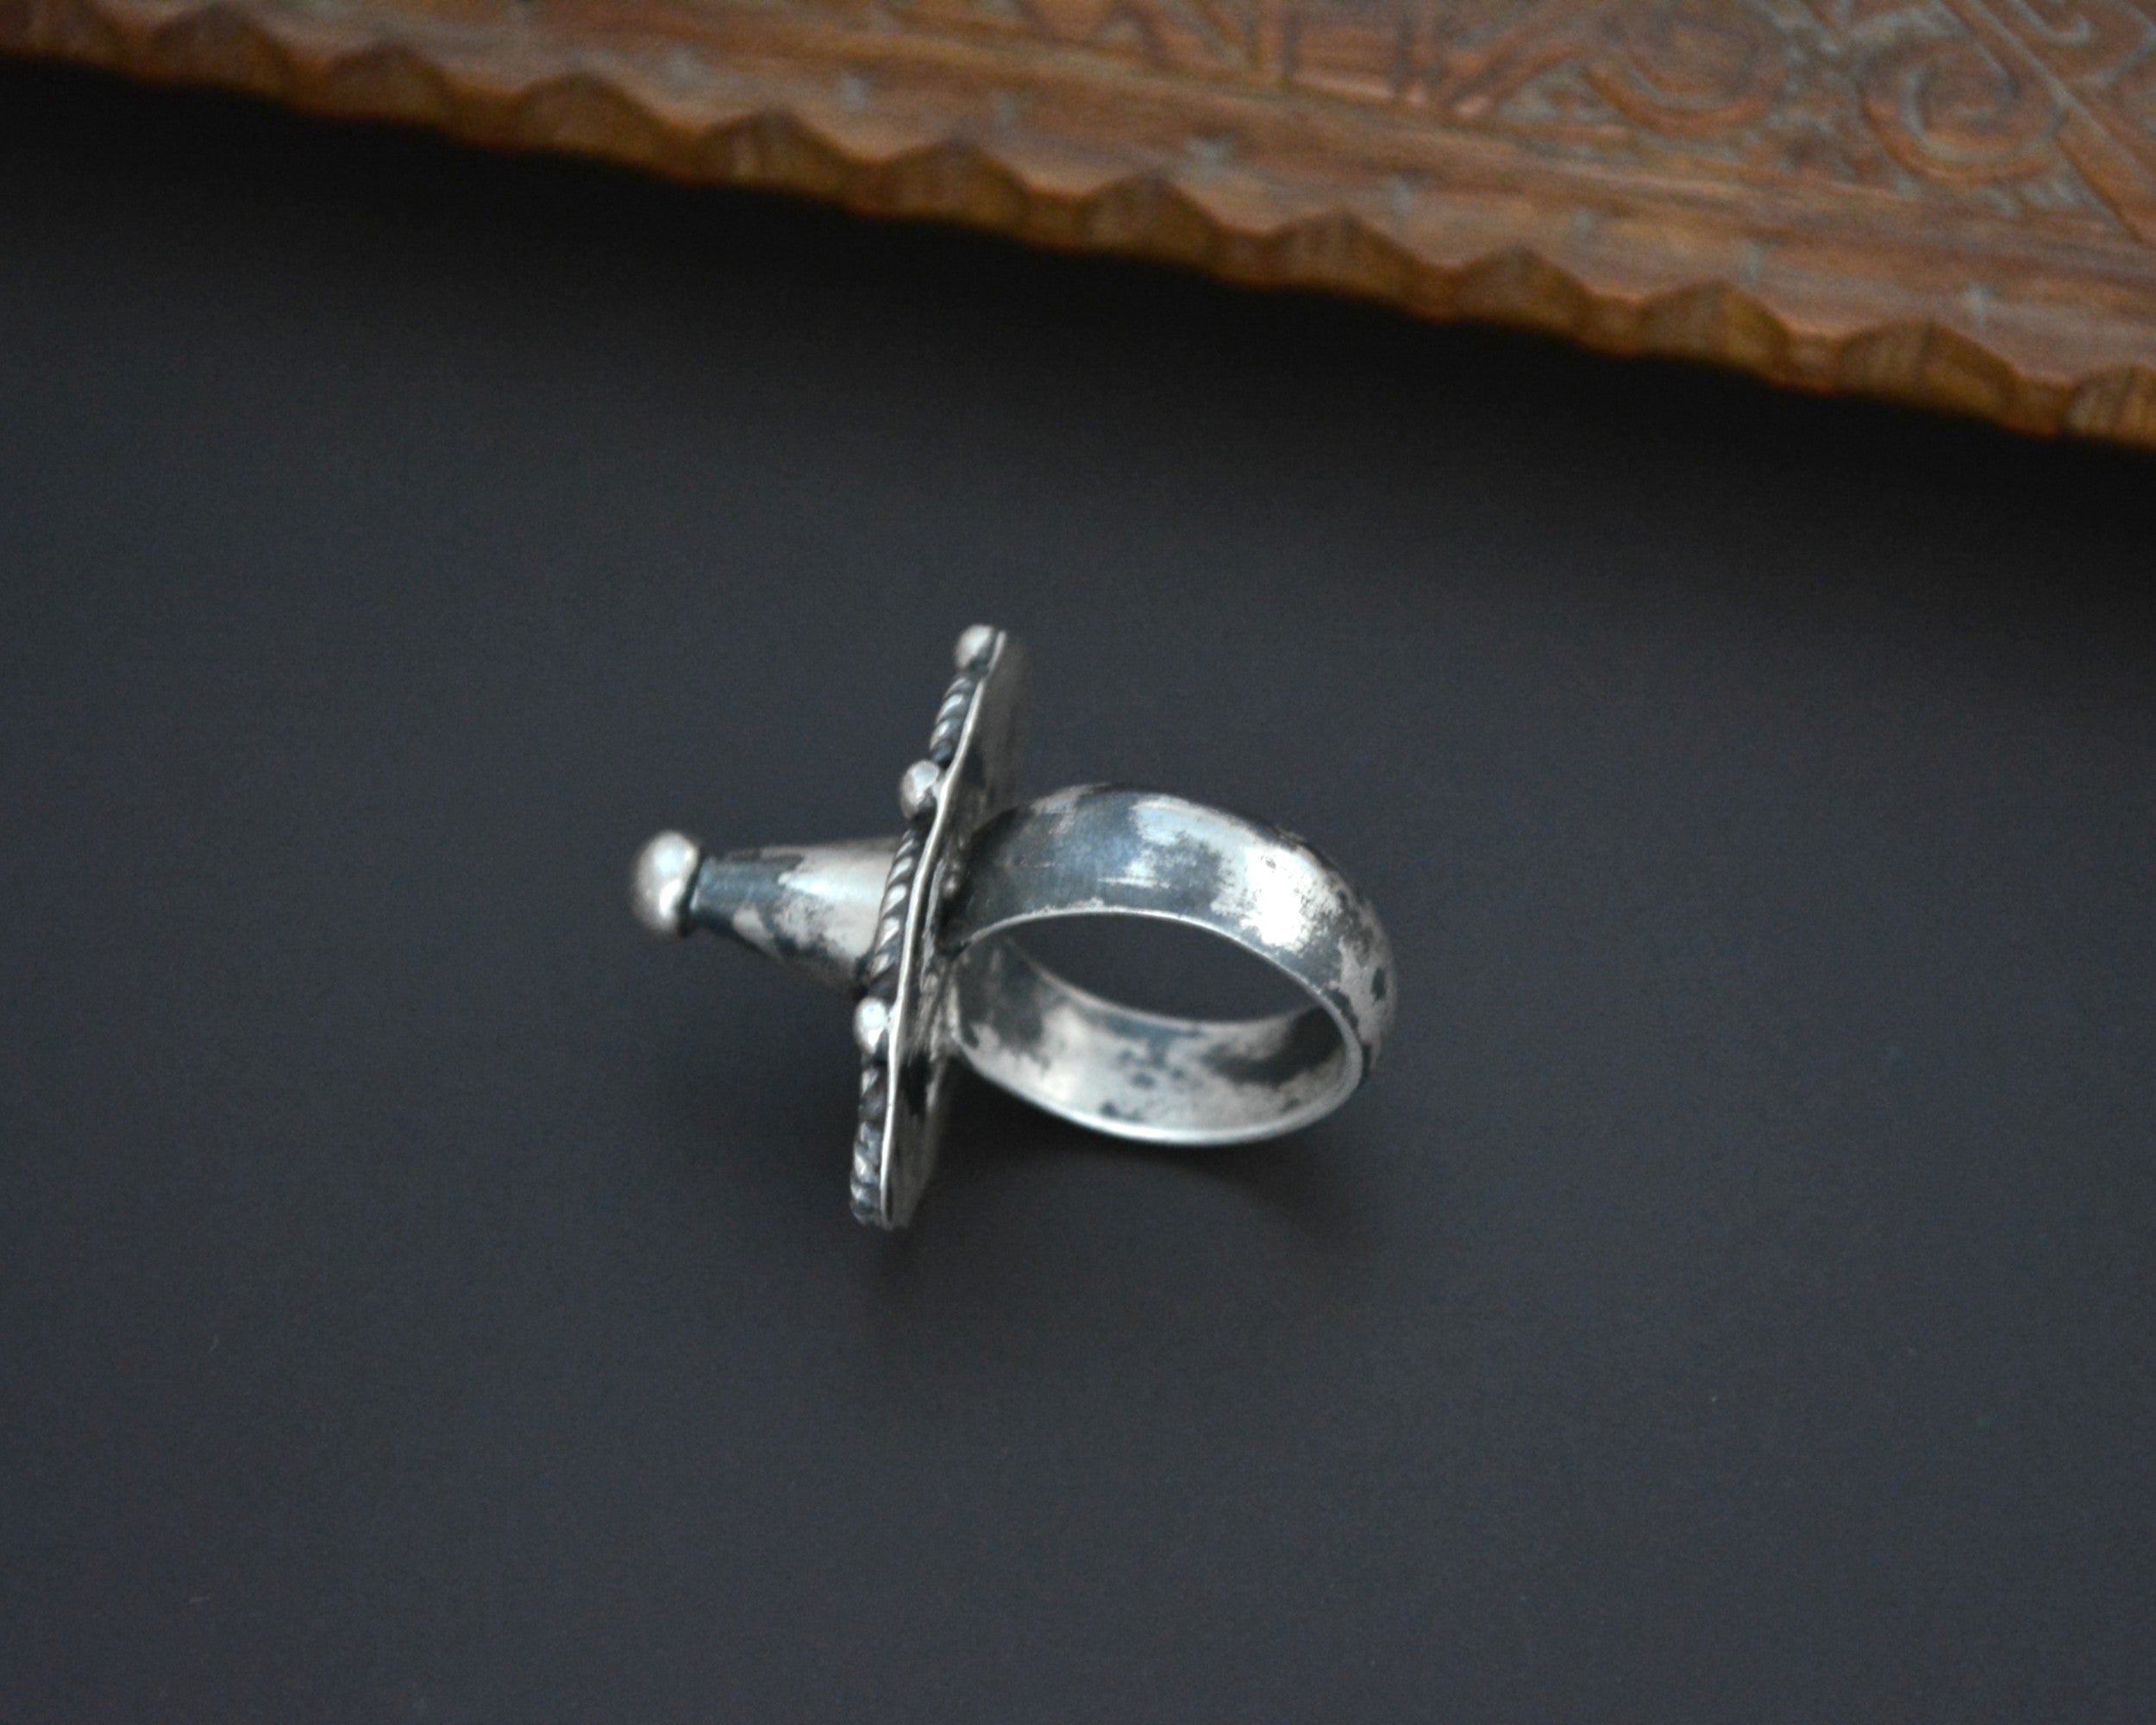 Rajasthani Silver Spike Ring - Size 7.5